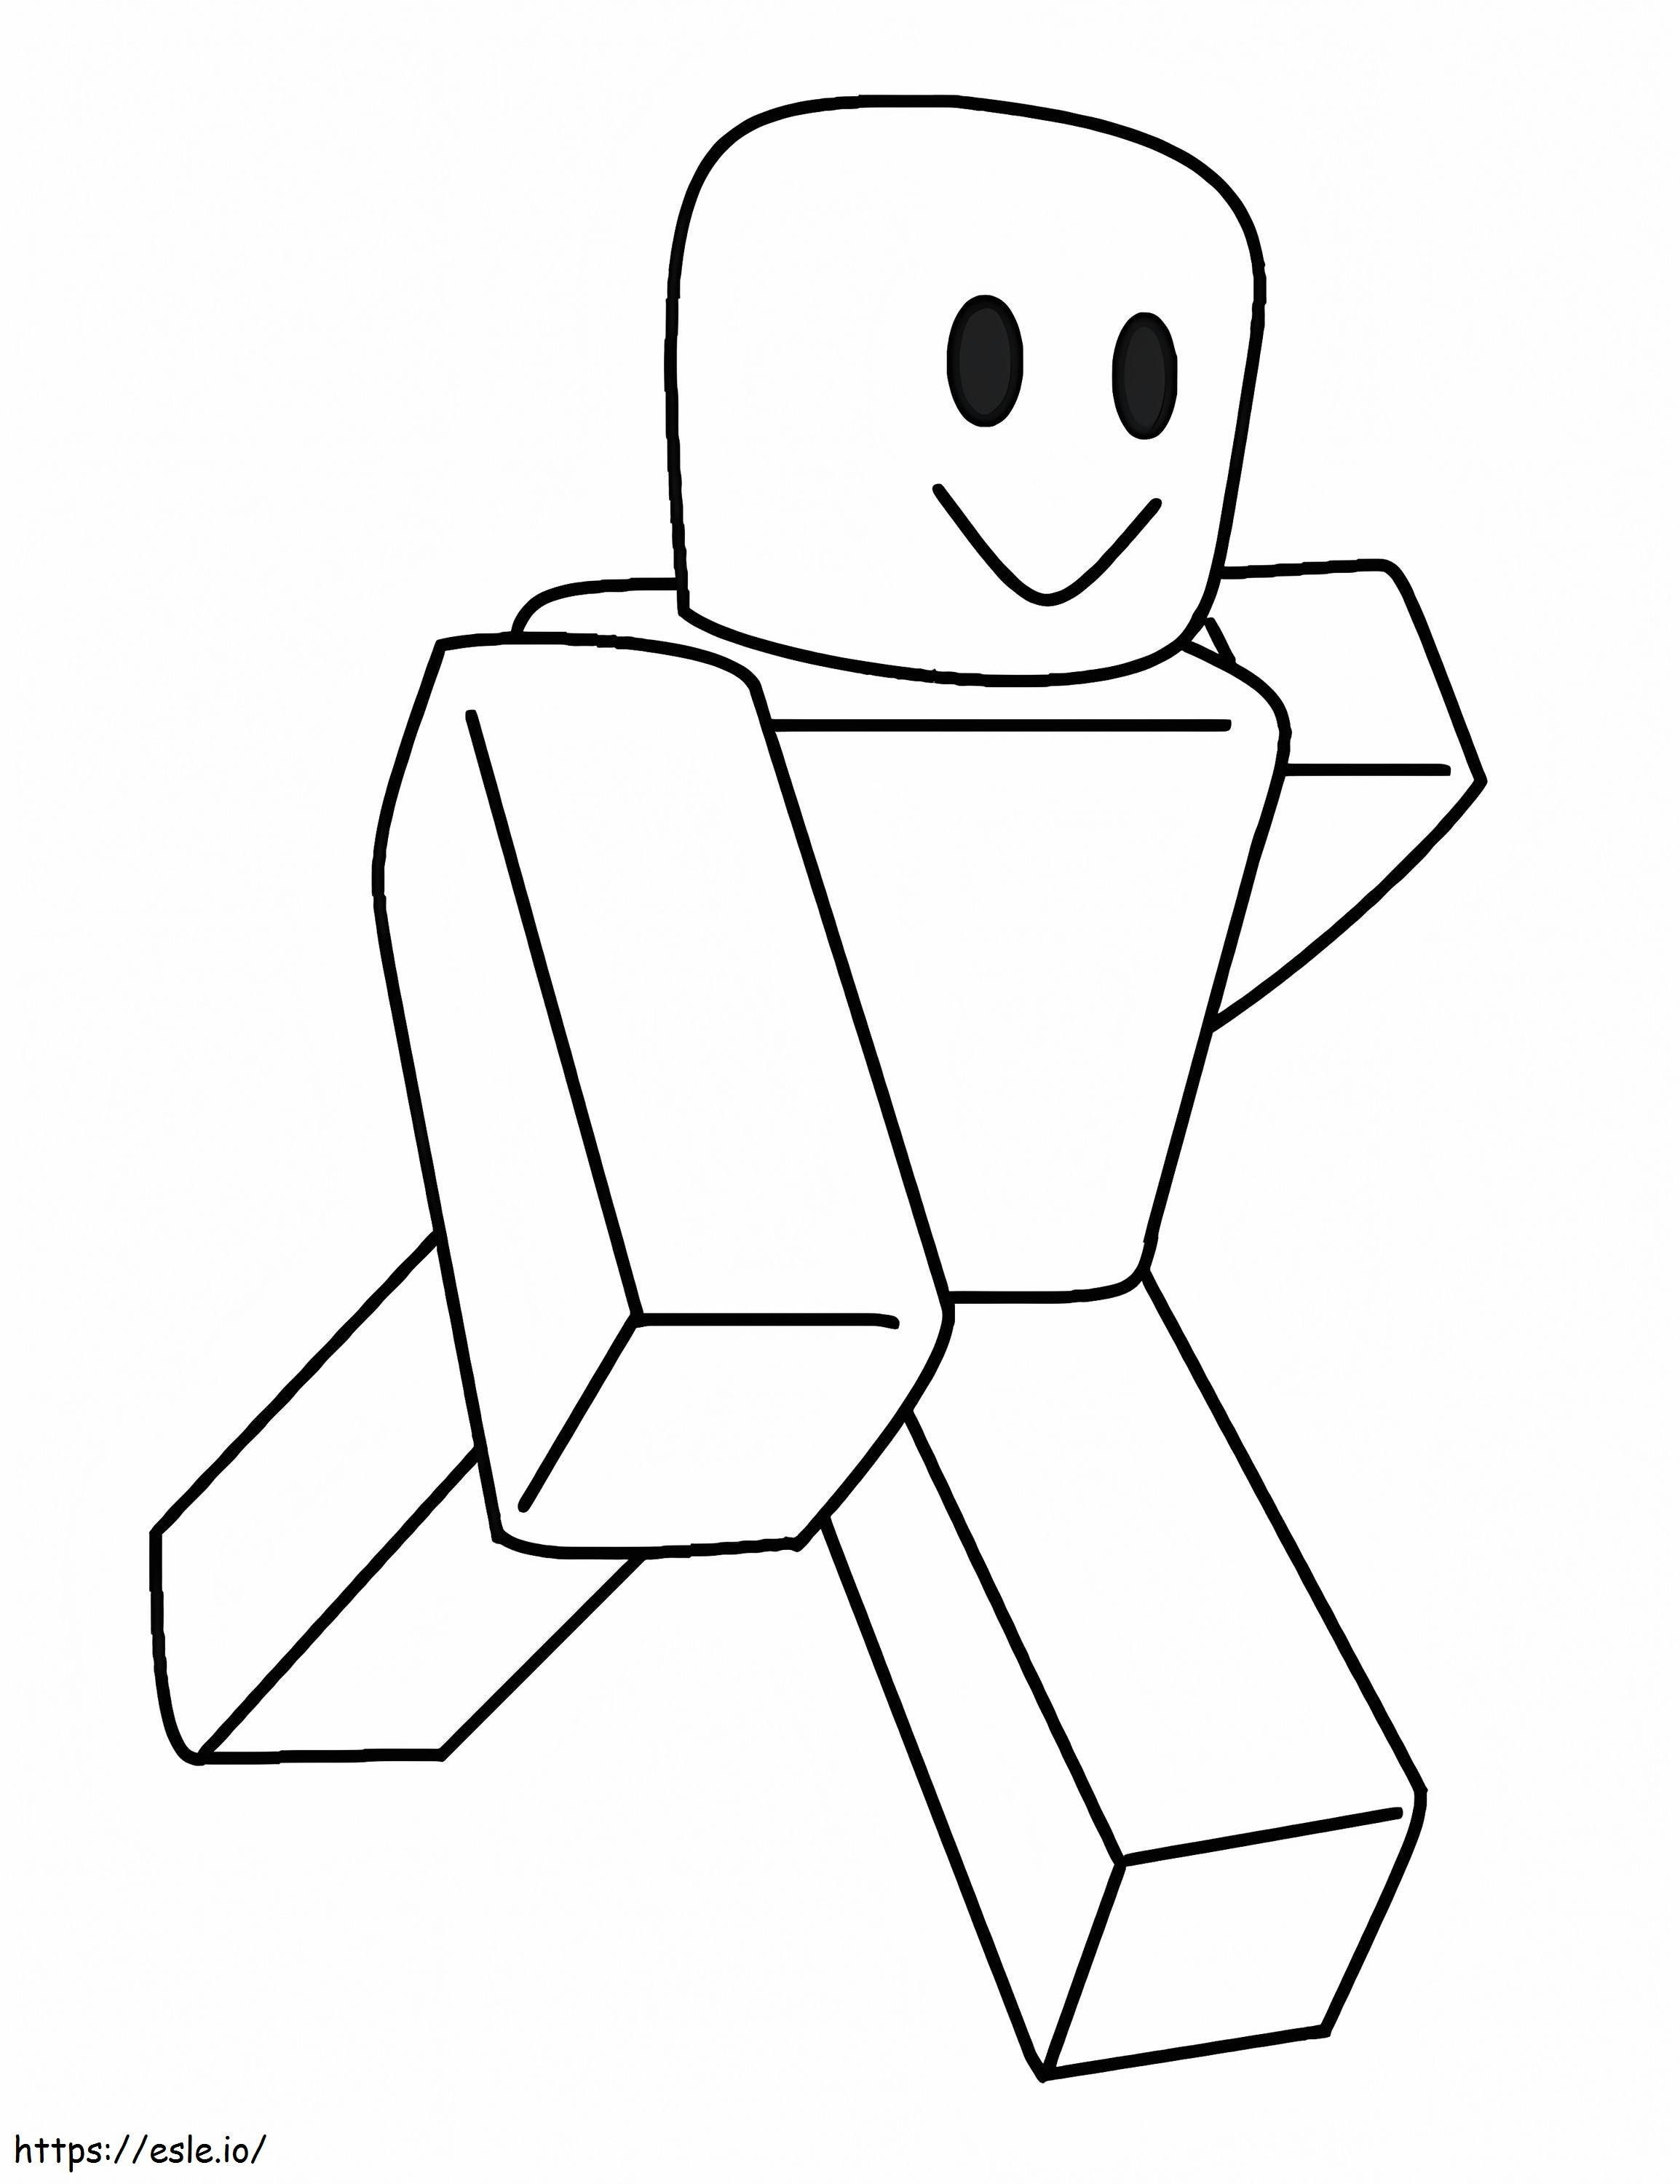 Easy Roblox coloring page